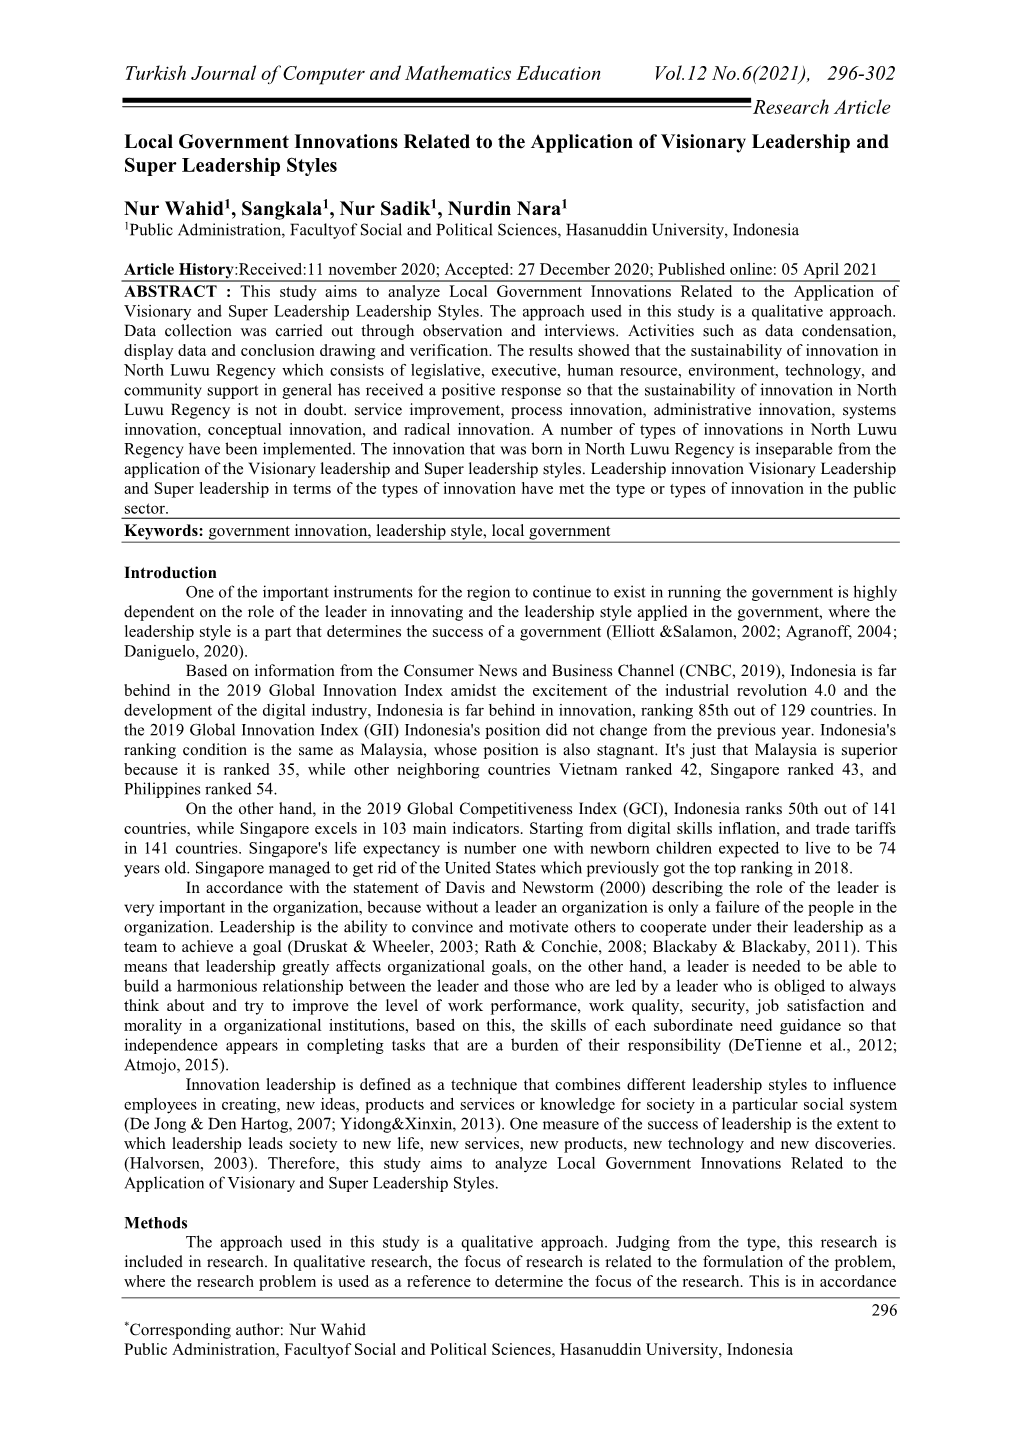 296-302 Research Article Local Government Innovations Related to the Application of Visionary Leadership and Super Leadership Styles